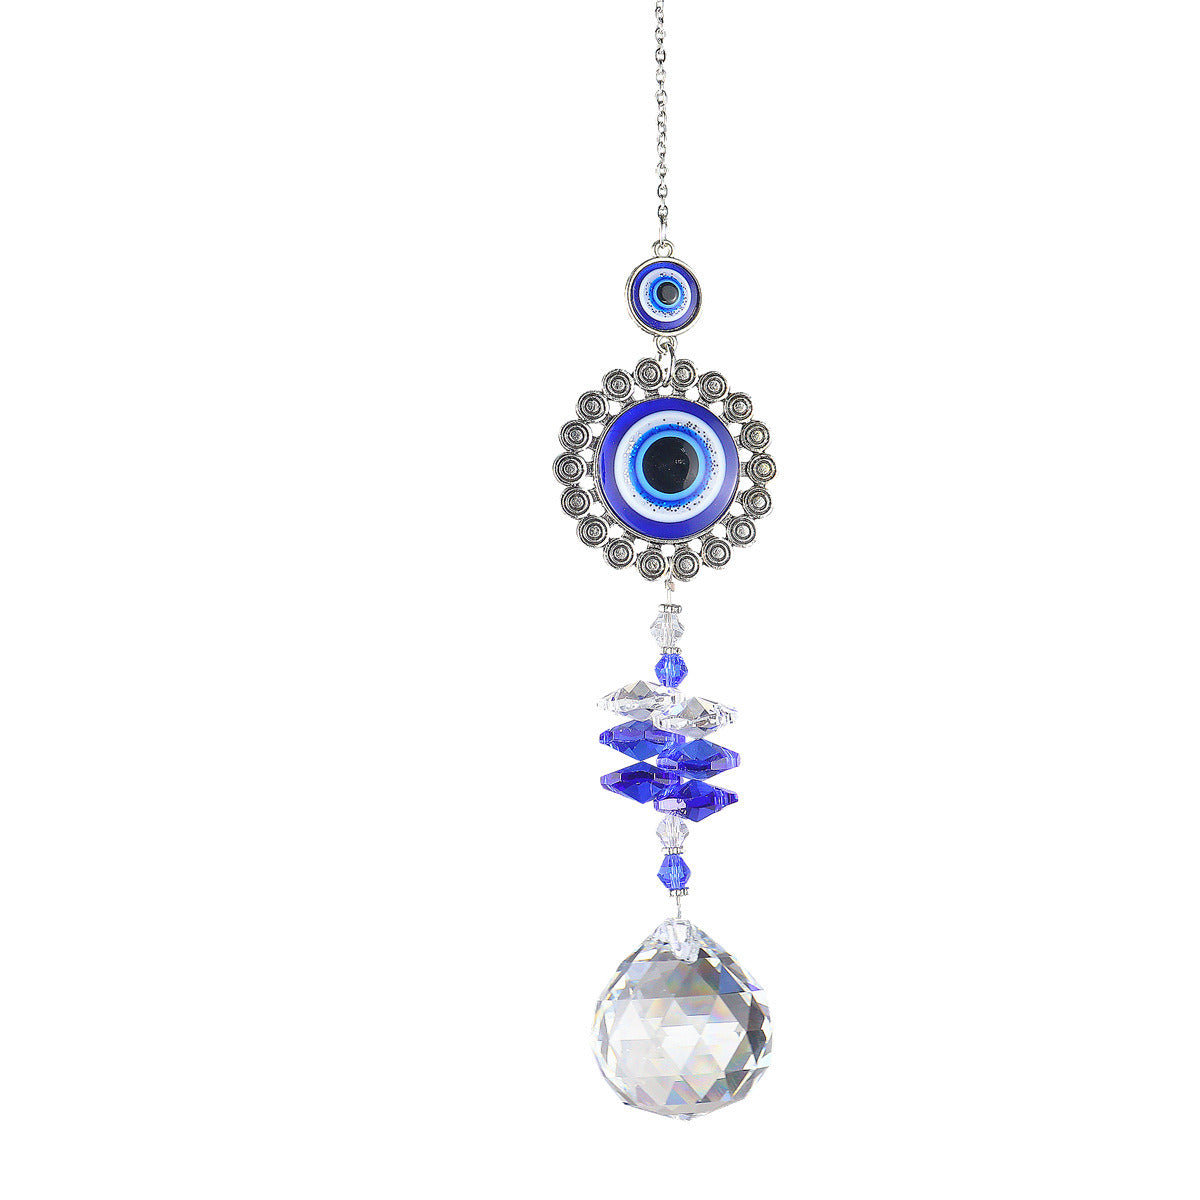 1pc Blue Butterfly Evil Eye Crystal Sun Catcher - Indoor Window Suncatcher with Prism Ball - Rainbow Maker for Good Luck and Hanging Ornament for Home, Garden, Office, Car - Wedding Pendant